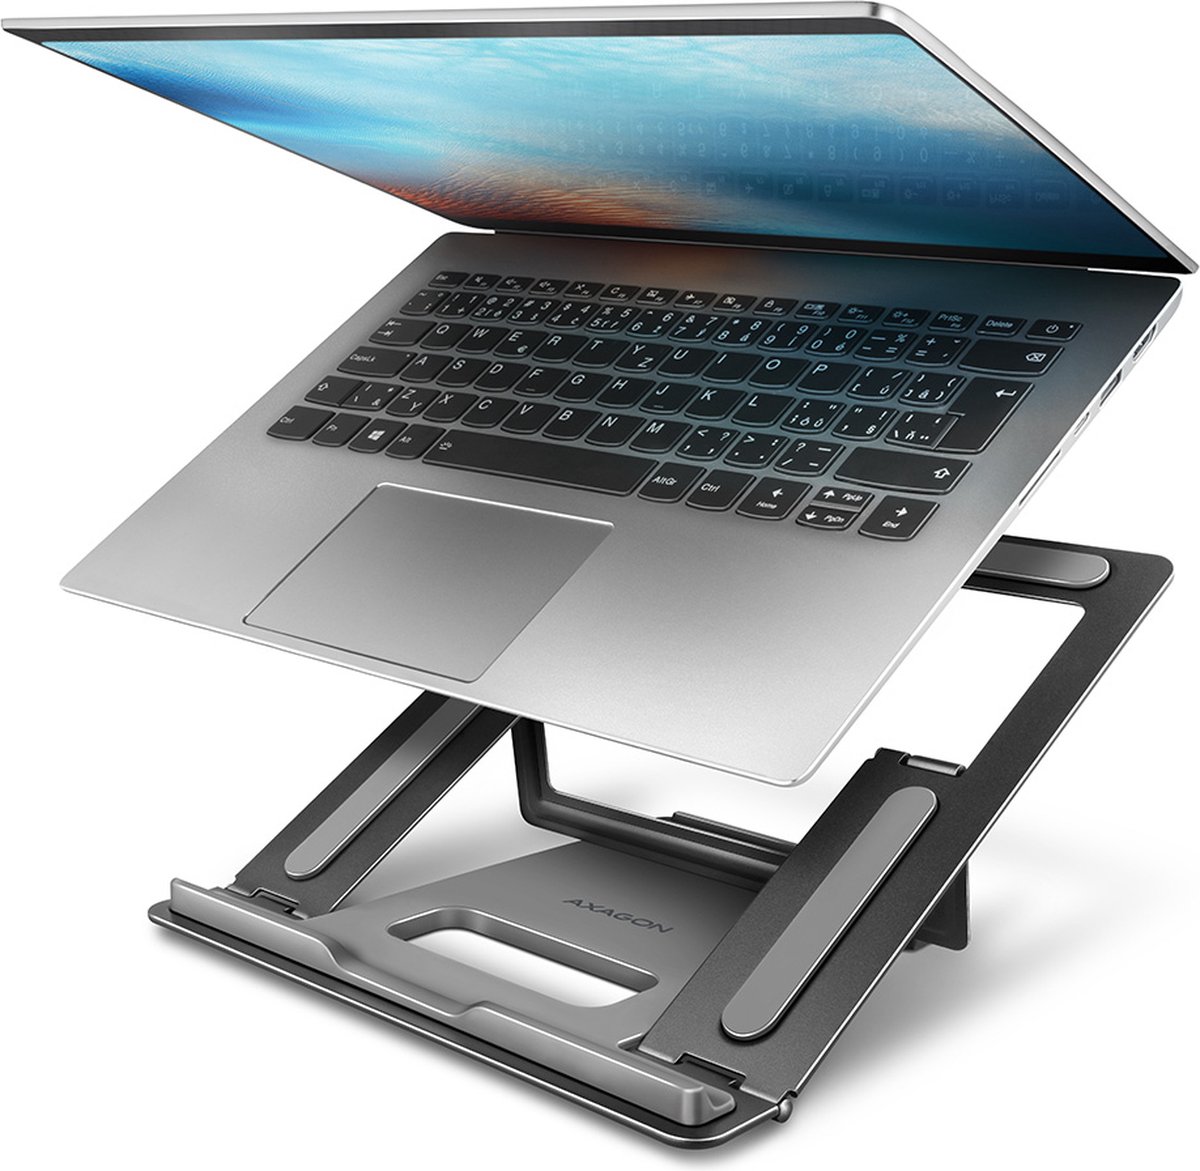 AXAGON STND-L ALU stand for 10 - 16 laptops, 4 adjustable angles